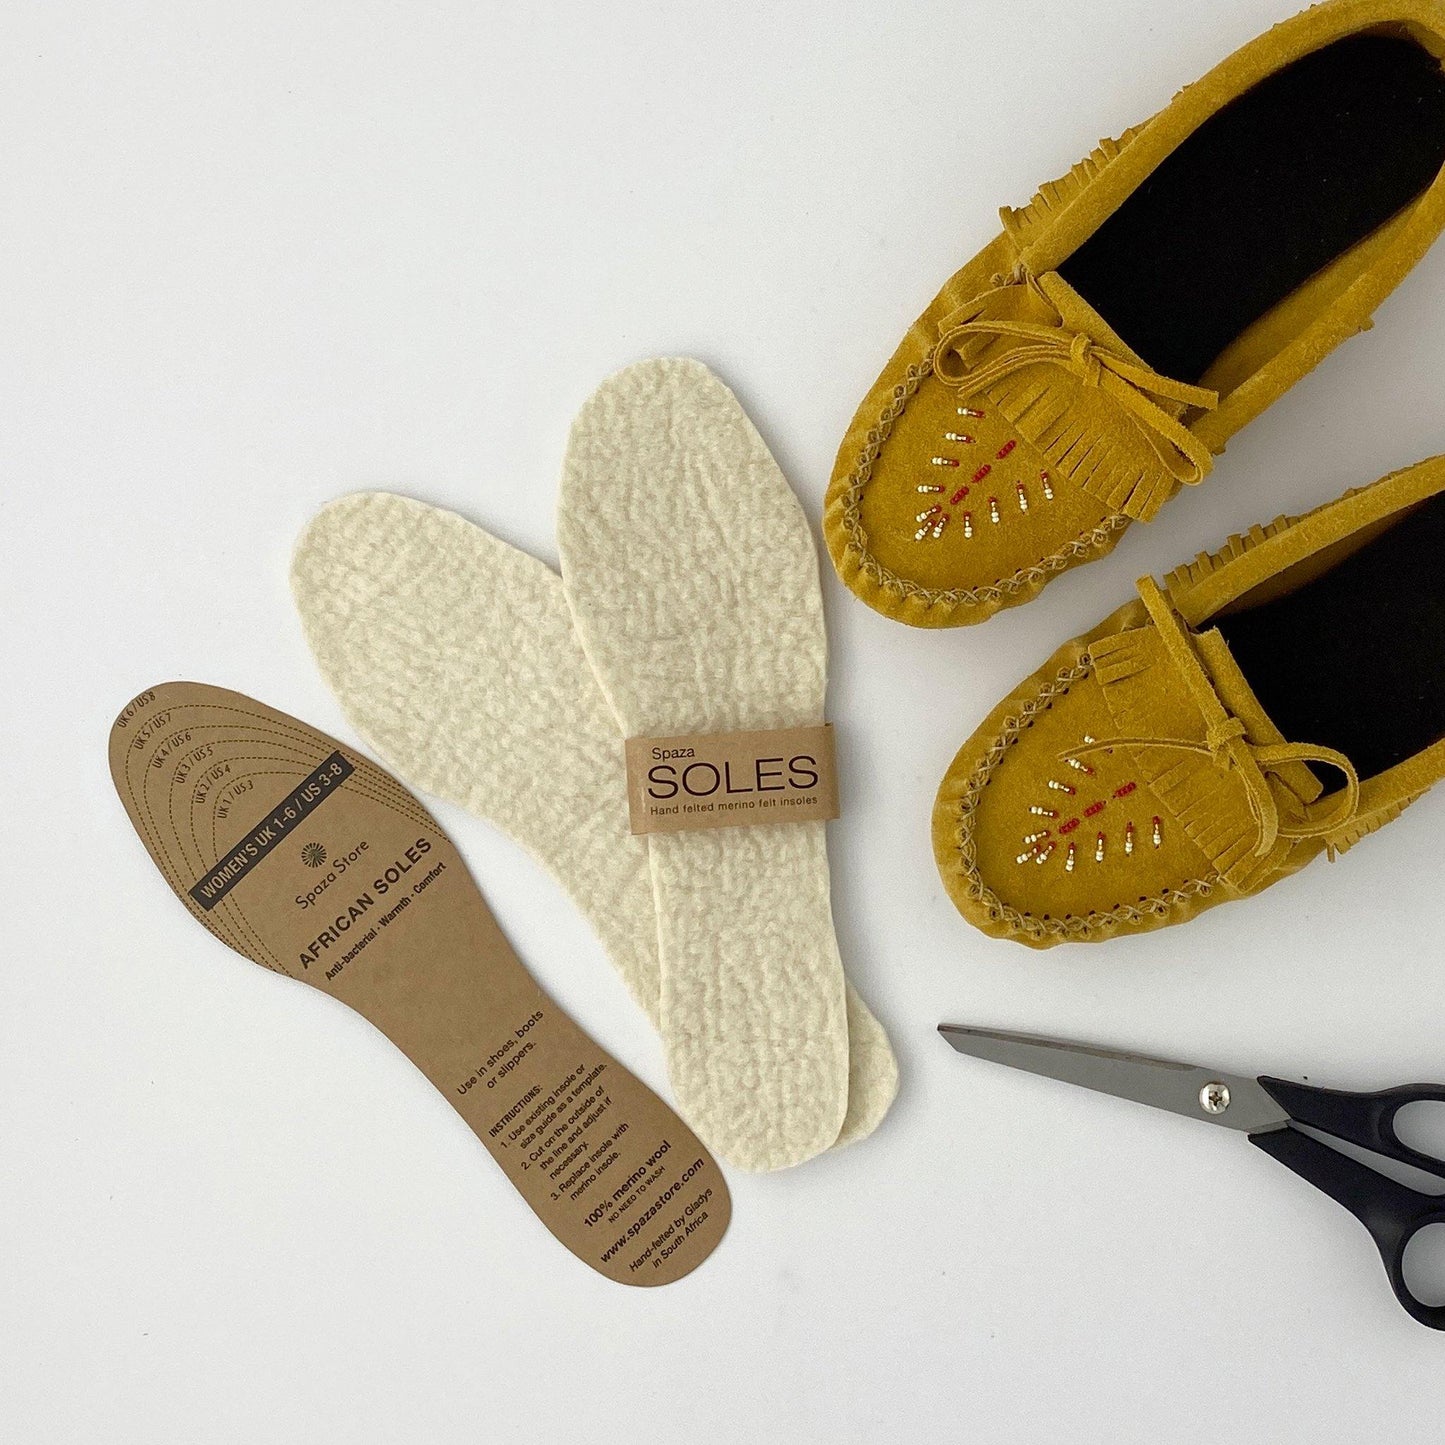 Felt Insoles | Merino Wool inserts for shoes, boots and slippers